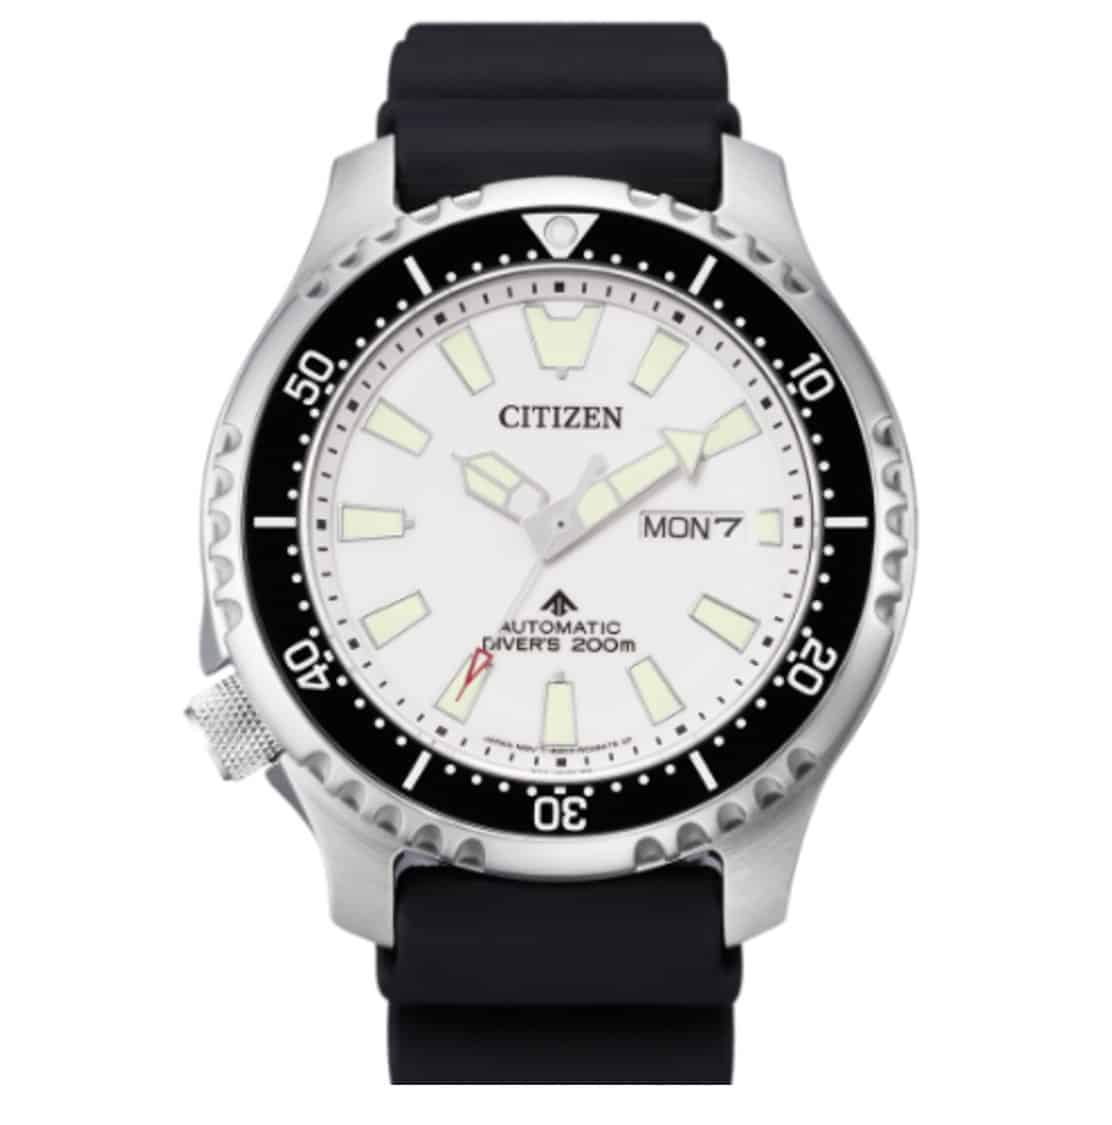 https://iknowwatches.com/wp-content/uploads/2020/12/Citizen-Promaster-NY0118-11A.jpg